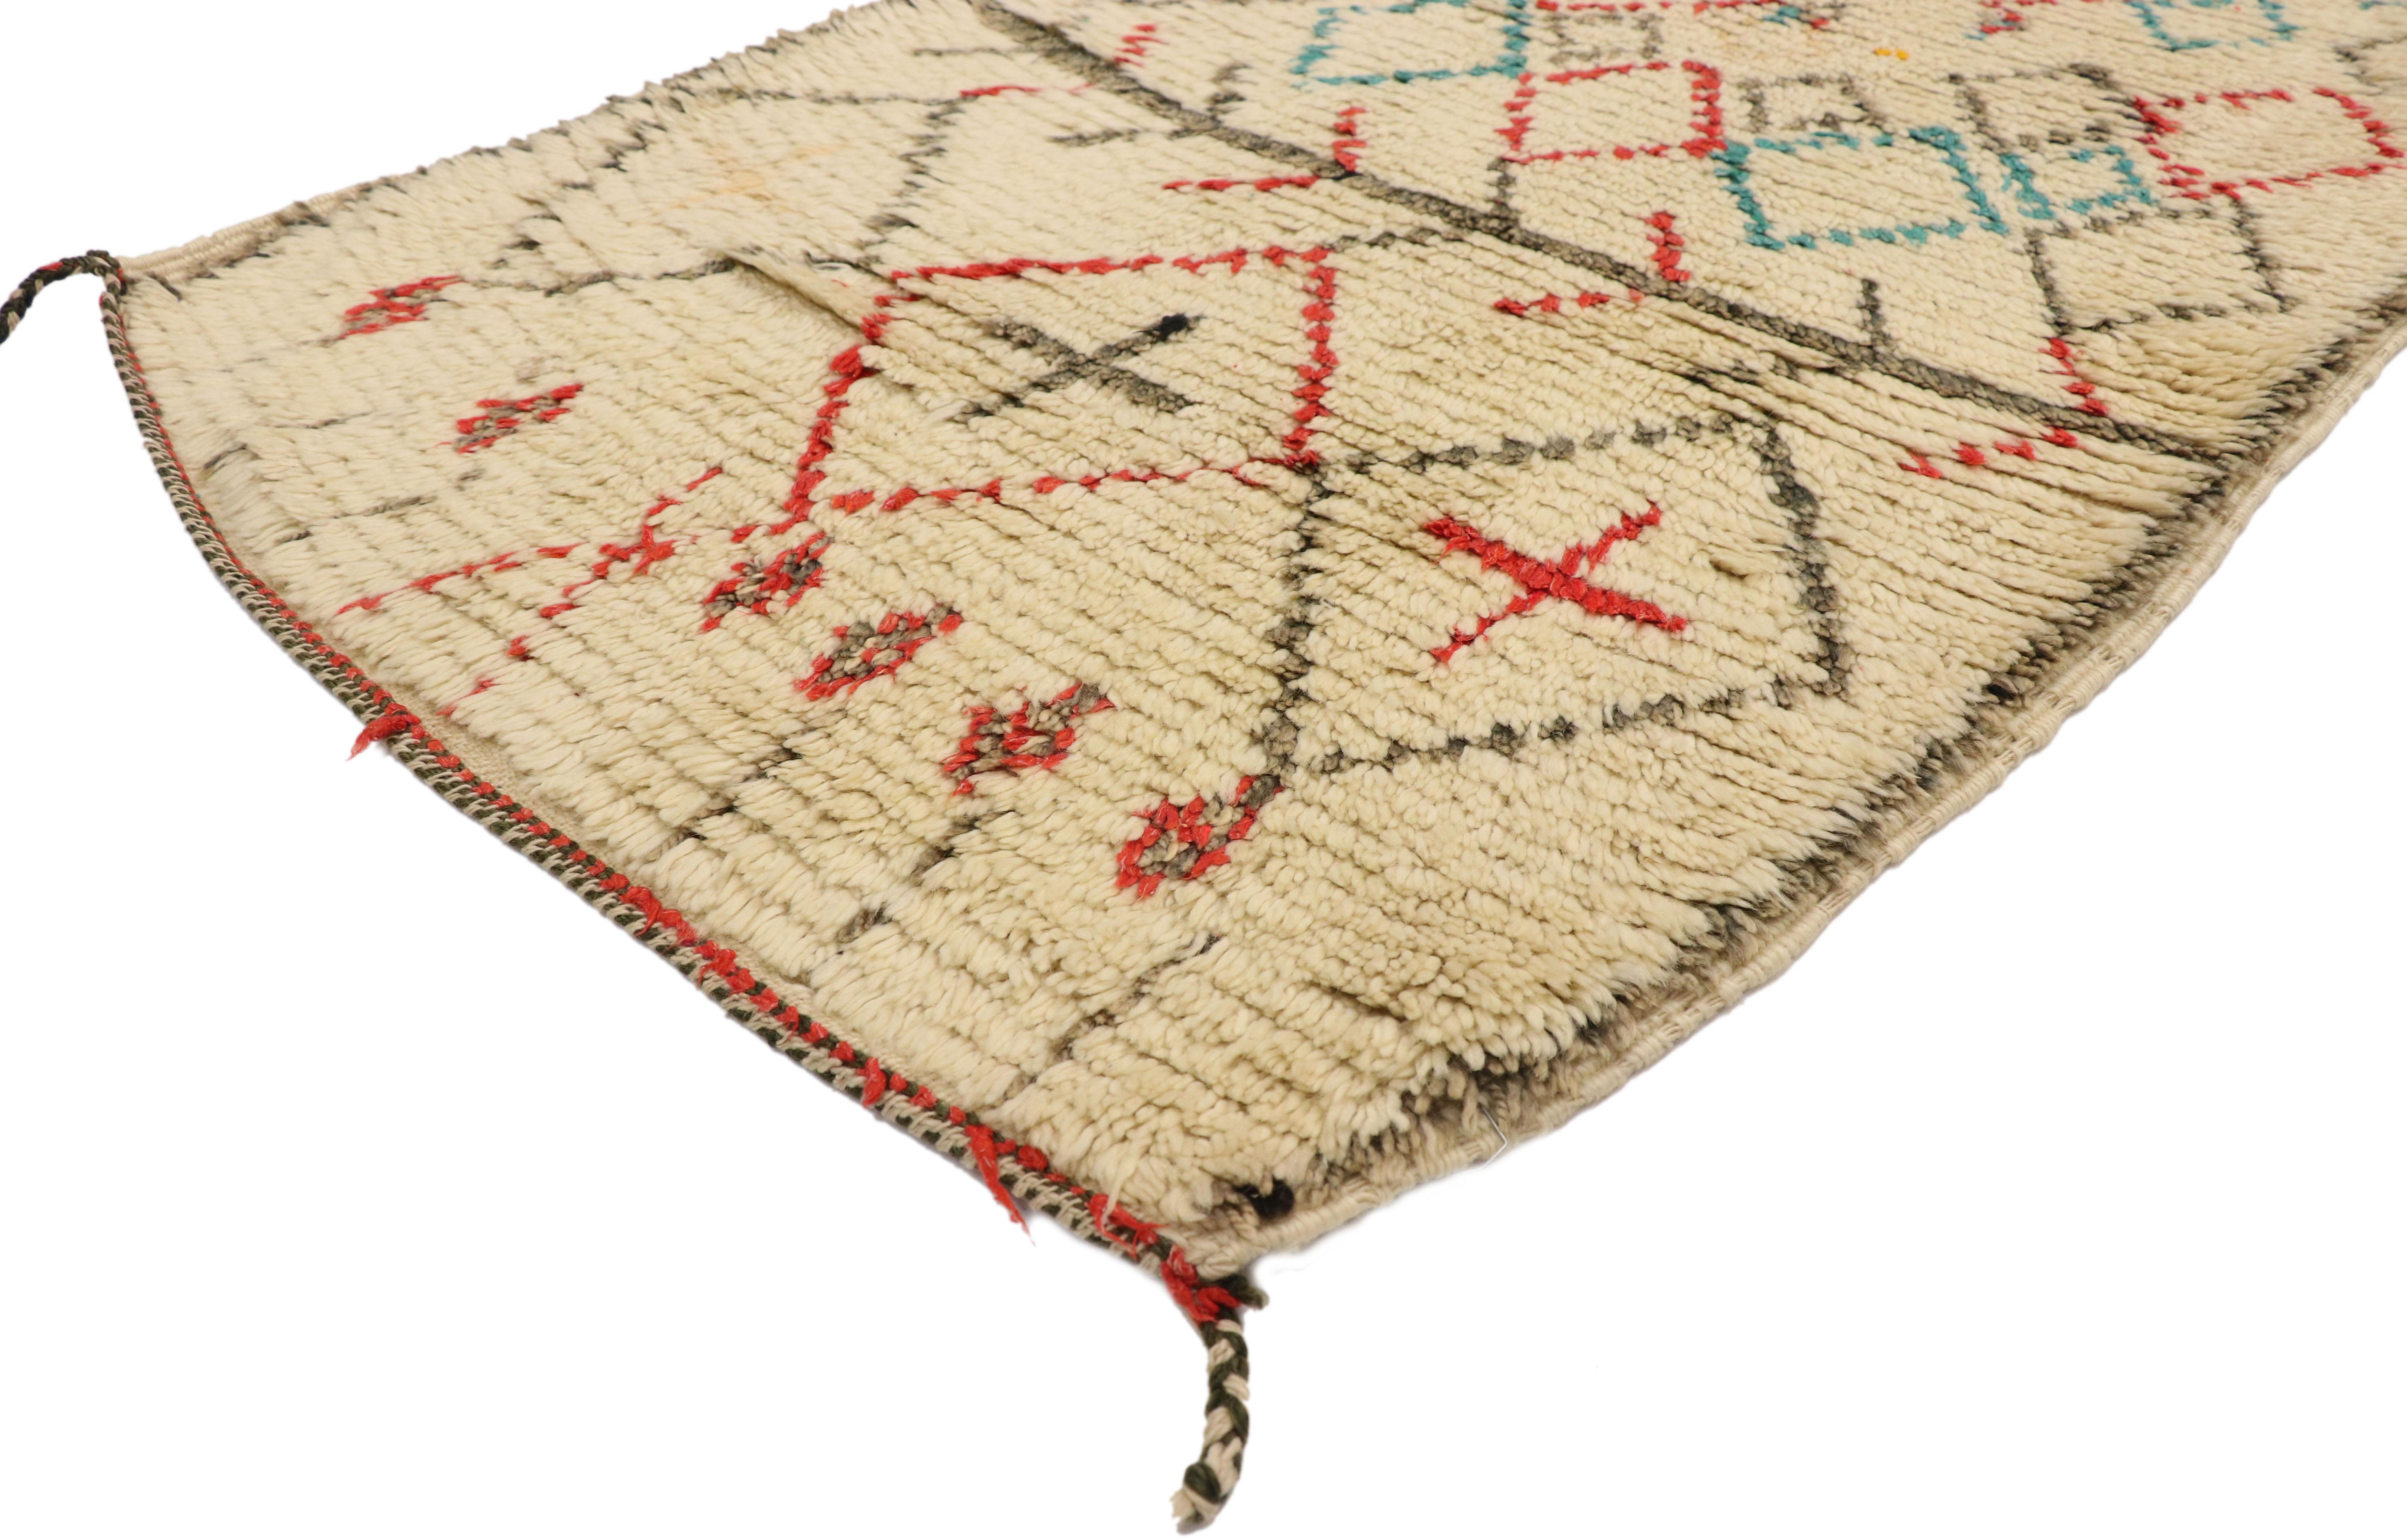 20362 Vintage Moroccan Azilal Rug Runner, 03'01 x 14'09. Moroccan Azilal carpet runners are narrow rugs handwoven by Berber artisans in the Azilal region of Morocco, characterized by intricate geometric patterns and vibrant colors that reflect the